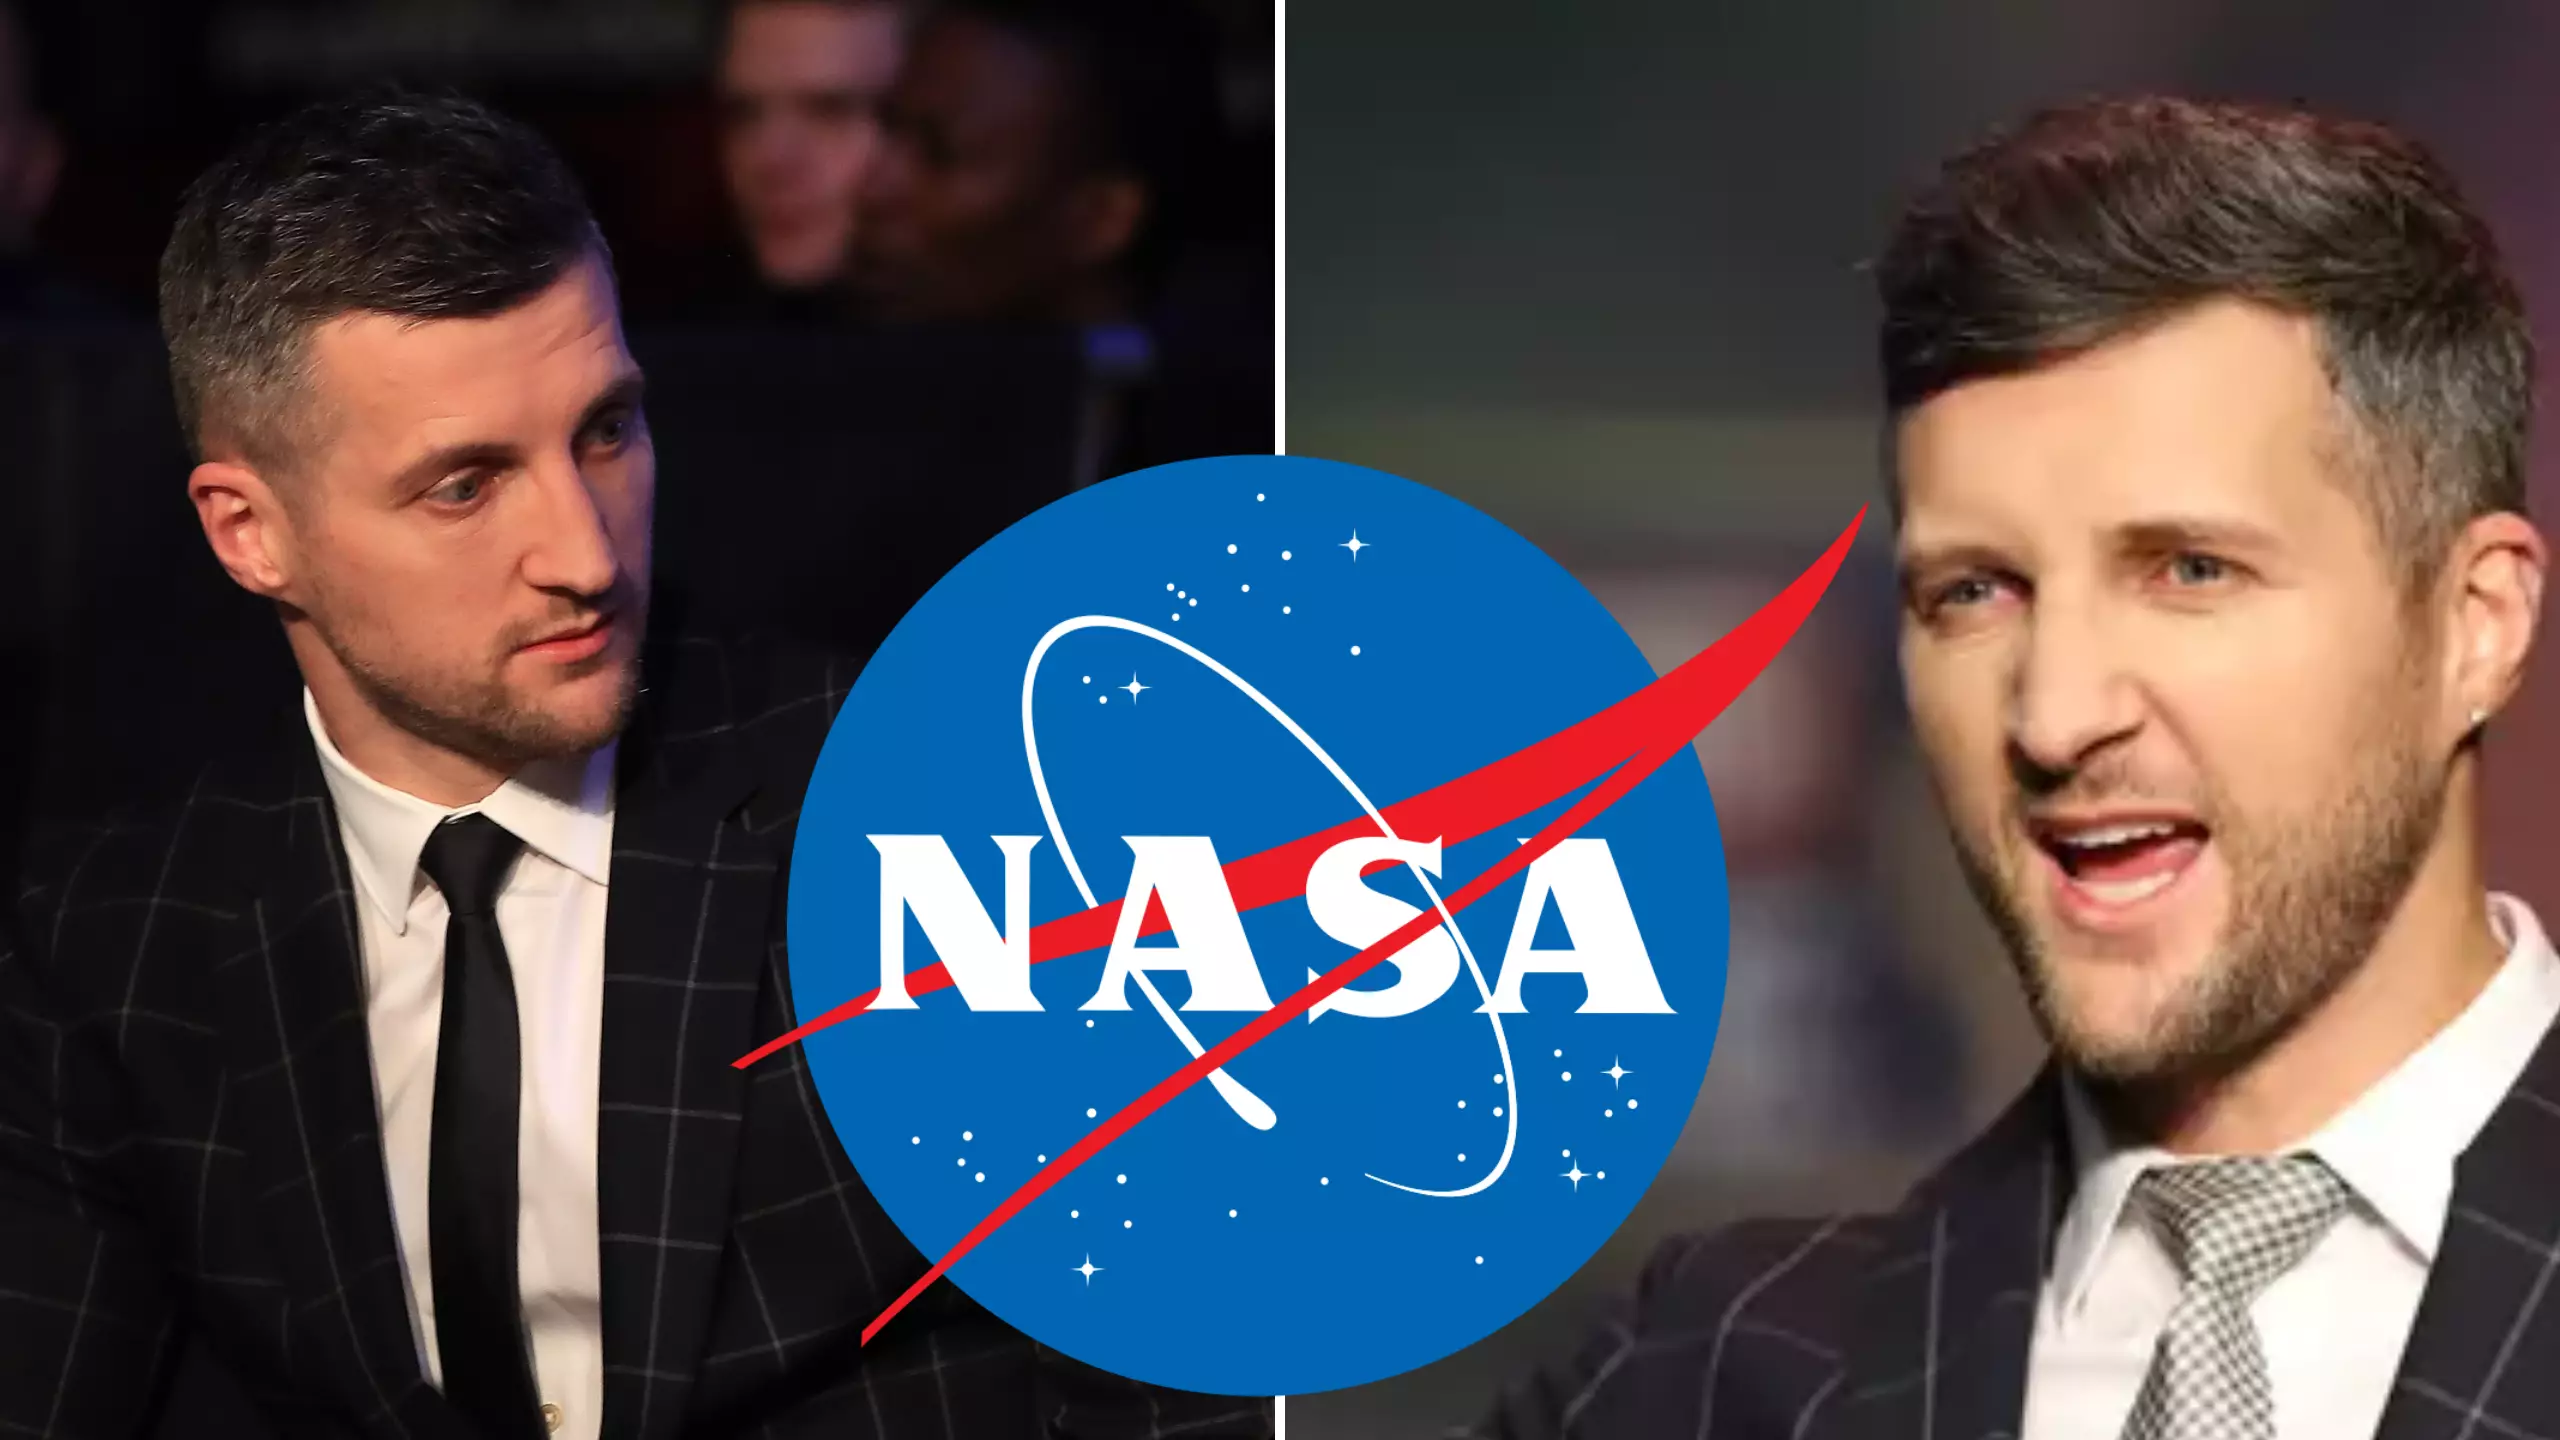 Carl Froch Thinks The World Is Flat And NASA Is Fake